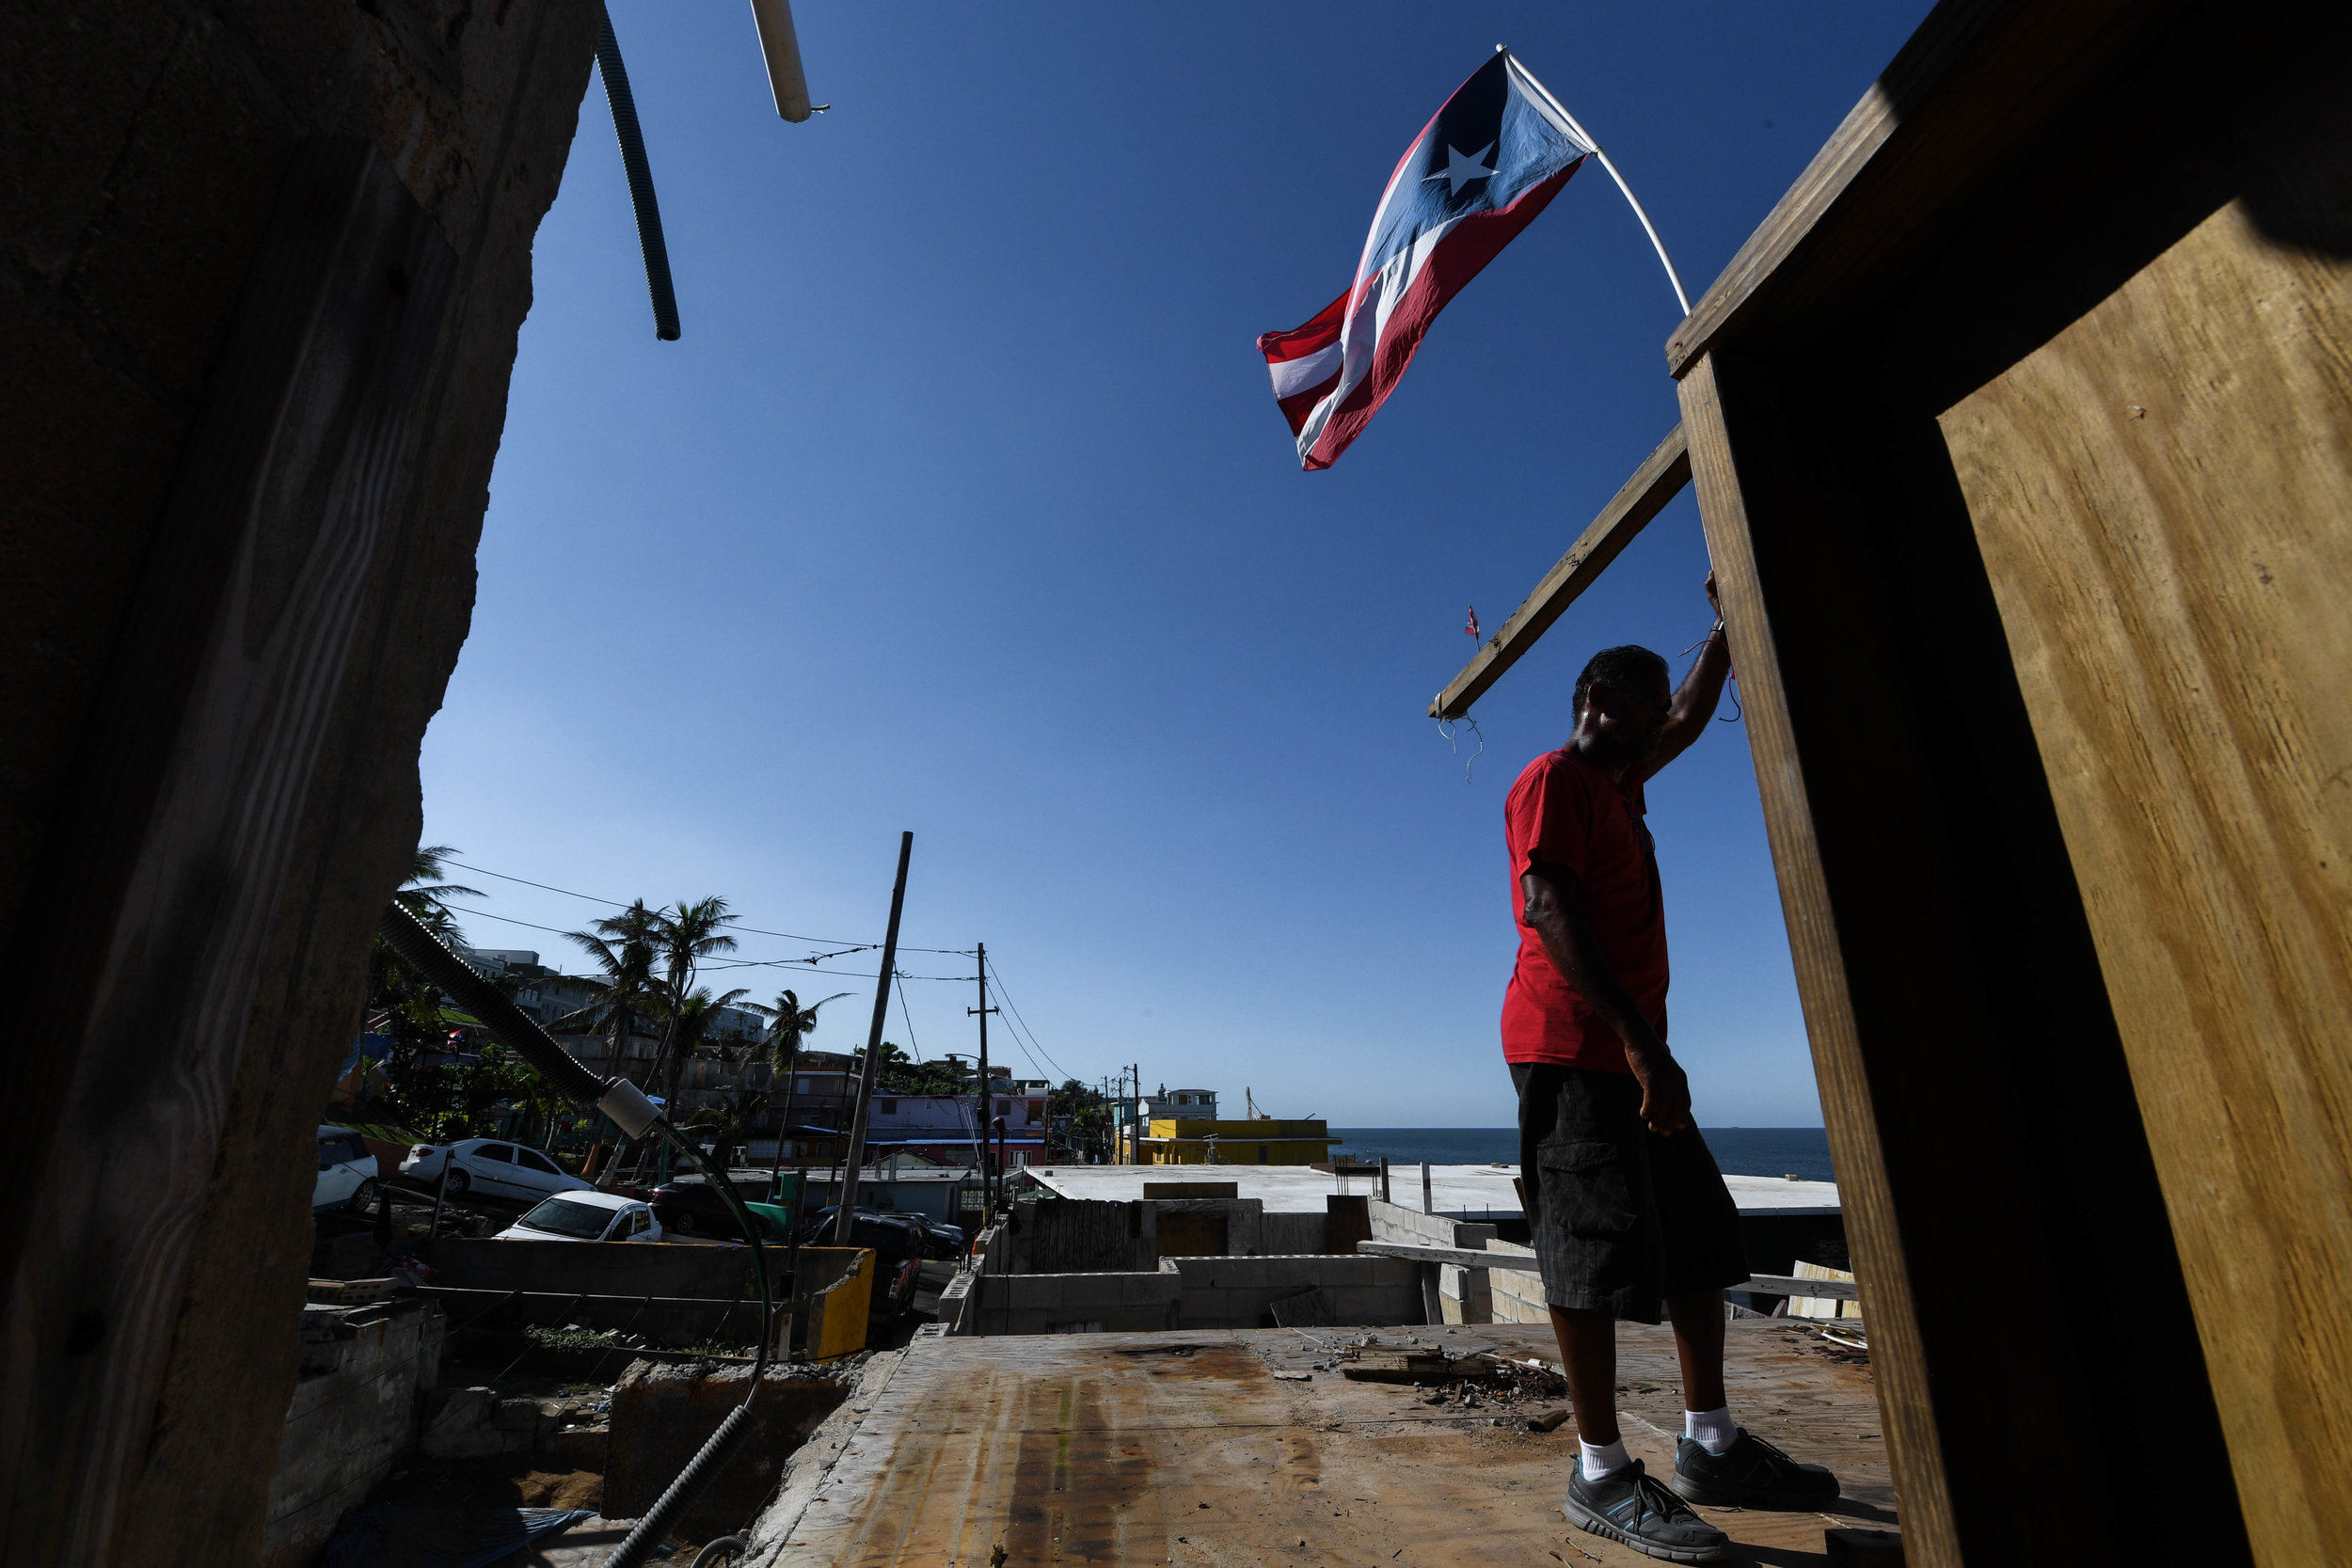  Roberto Virbuet, 55, takes a break from rebuilding his home in La Perla, Puerto Rico. Virbuet is unsure if he can continue living in Puerto Rico after Hurricane Maria. "This is not the Puerto Rico, the one I am living in, this does not feel like hom